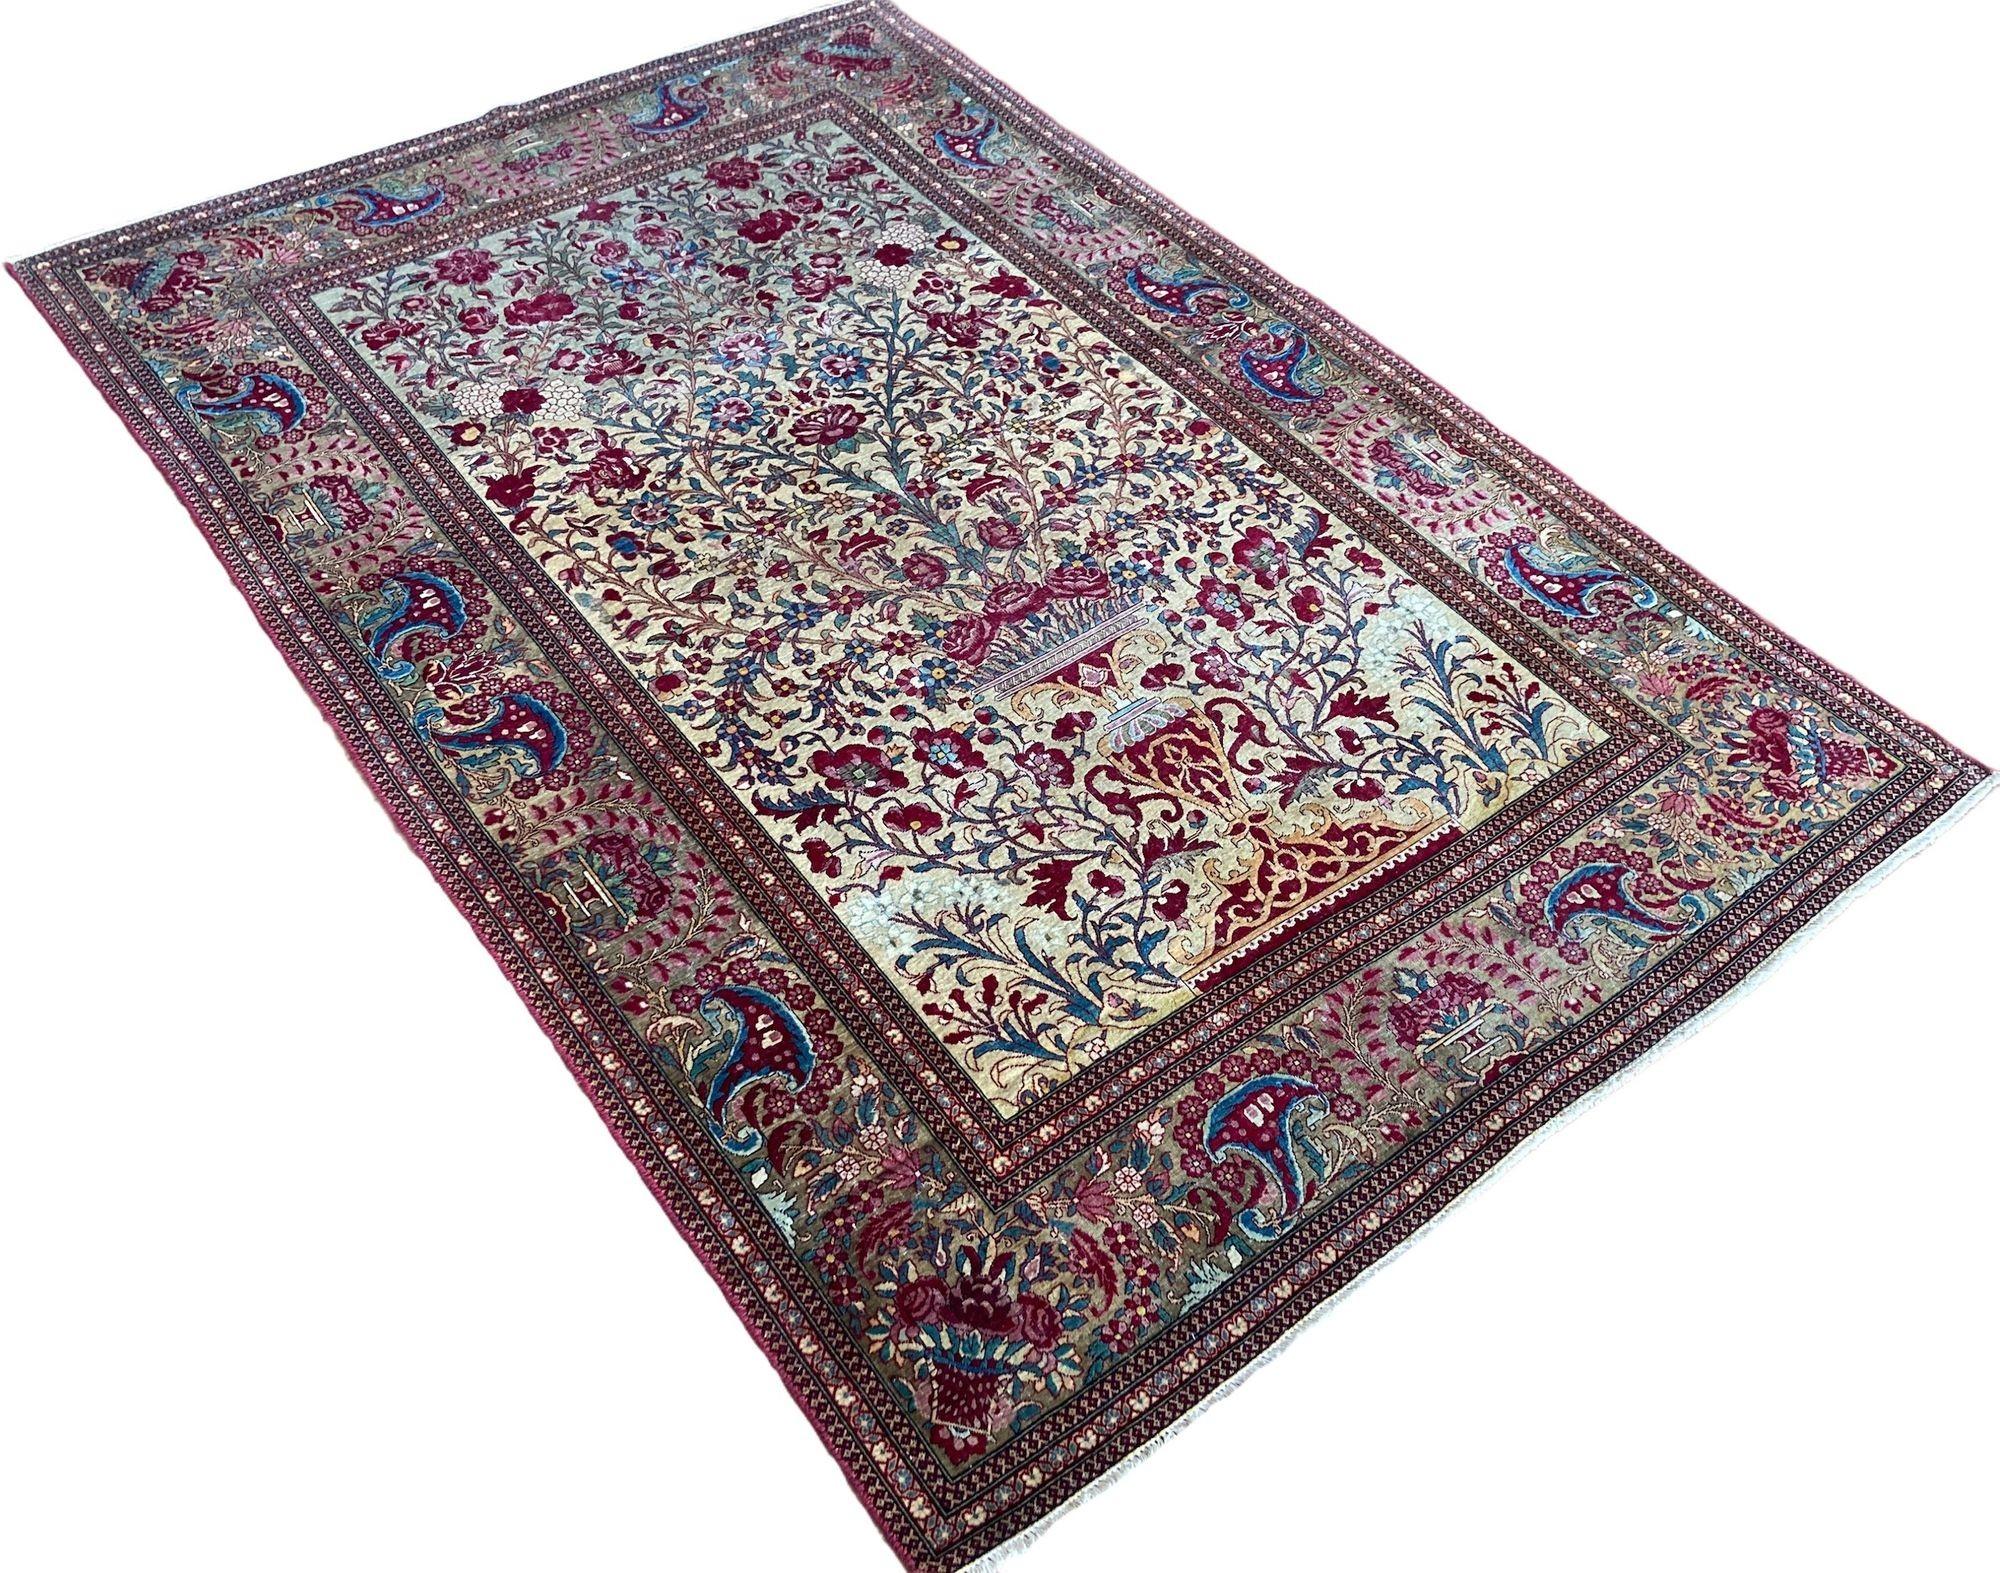 Antique Isfahan Rug 2.04m x 1.38m In Good Condition For Sale In St. Albans, GB